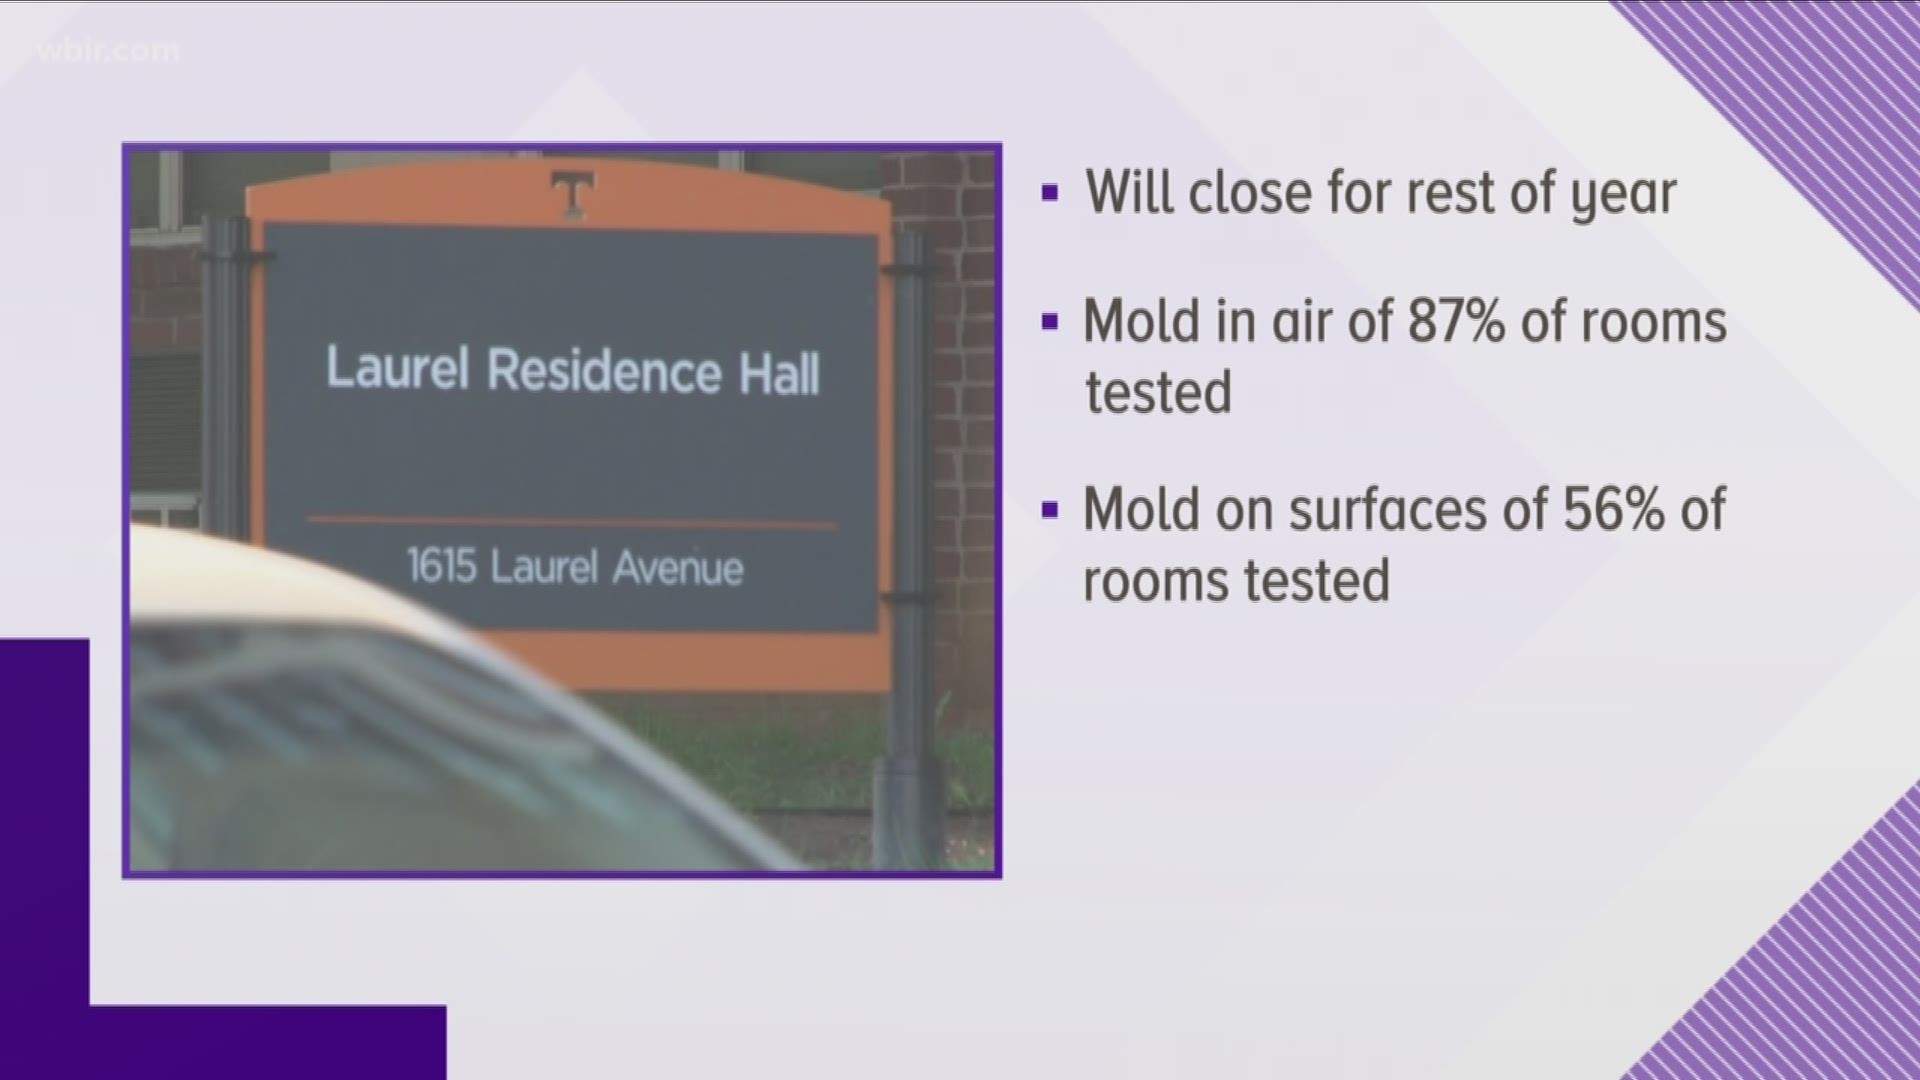 We now know they found mold in the air in 87 percent of the rooms they sampled. They also found mold on surfaces in 56 percent of the rooms.